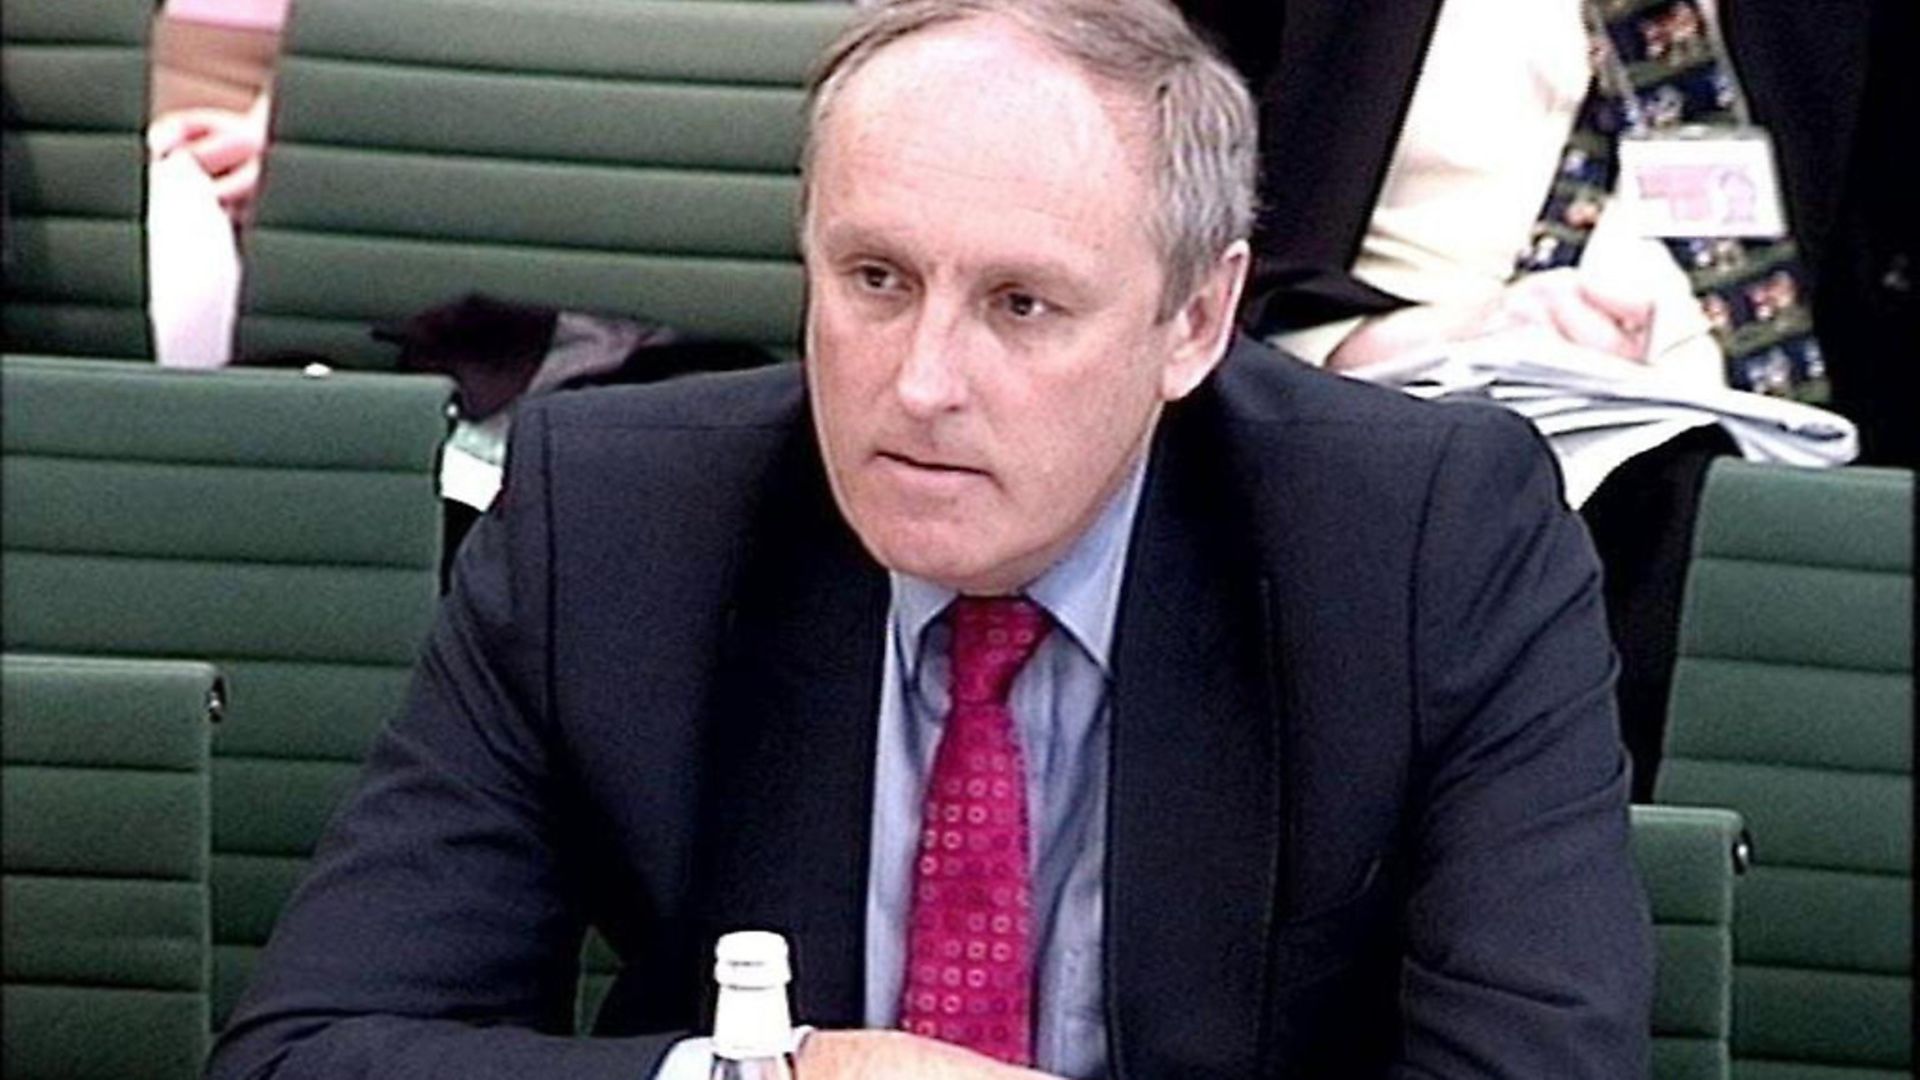 Paul Dacre, Editor of the Daily Mail, gives evidence, to the House of Commons Public Administration Committee, held in The Grimond Room, on the Phillis review of Government Communications. PHOTO: PA Archive - Credit: PA Archive/PA Images